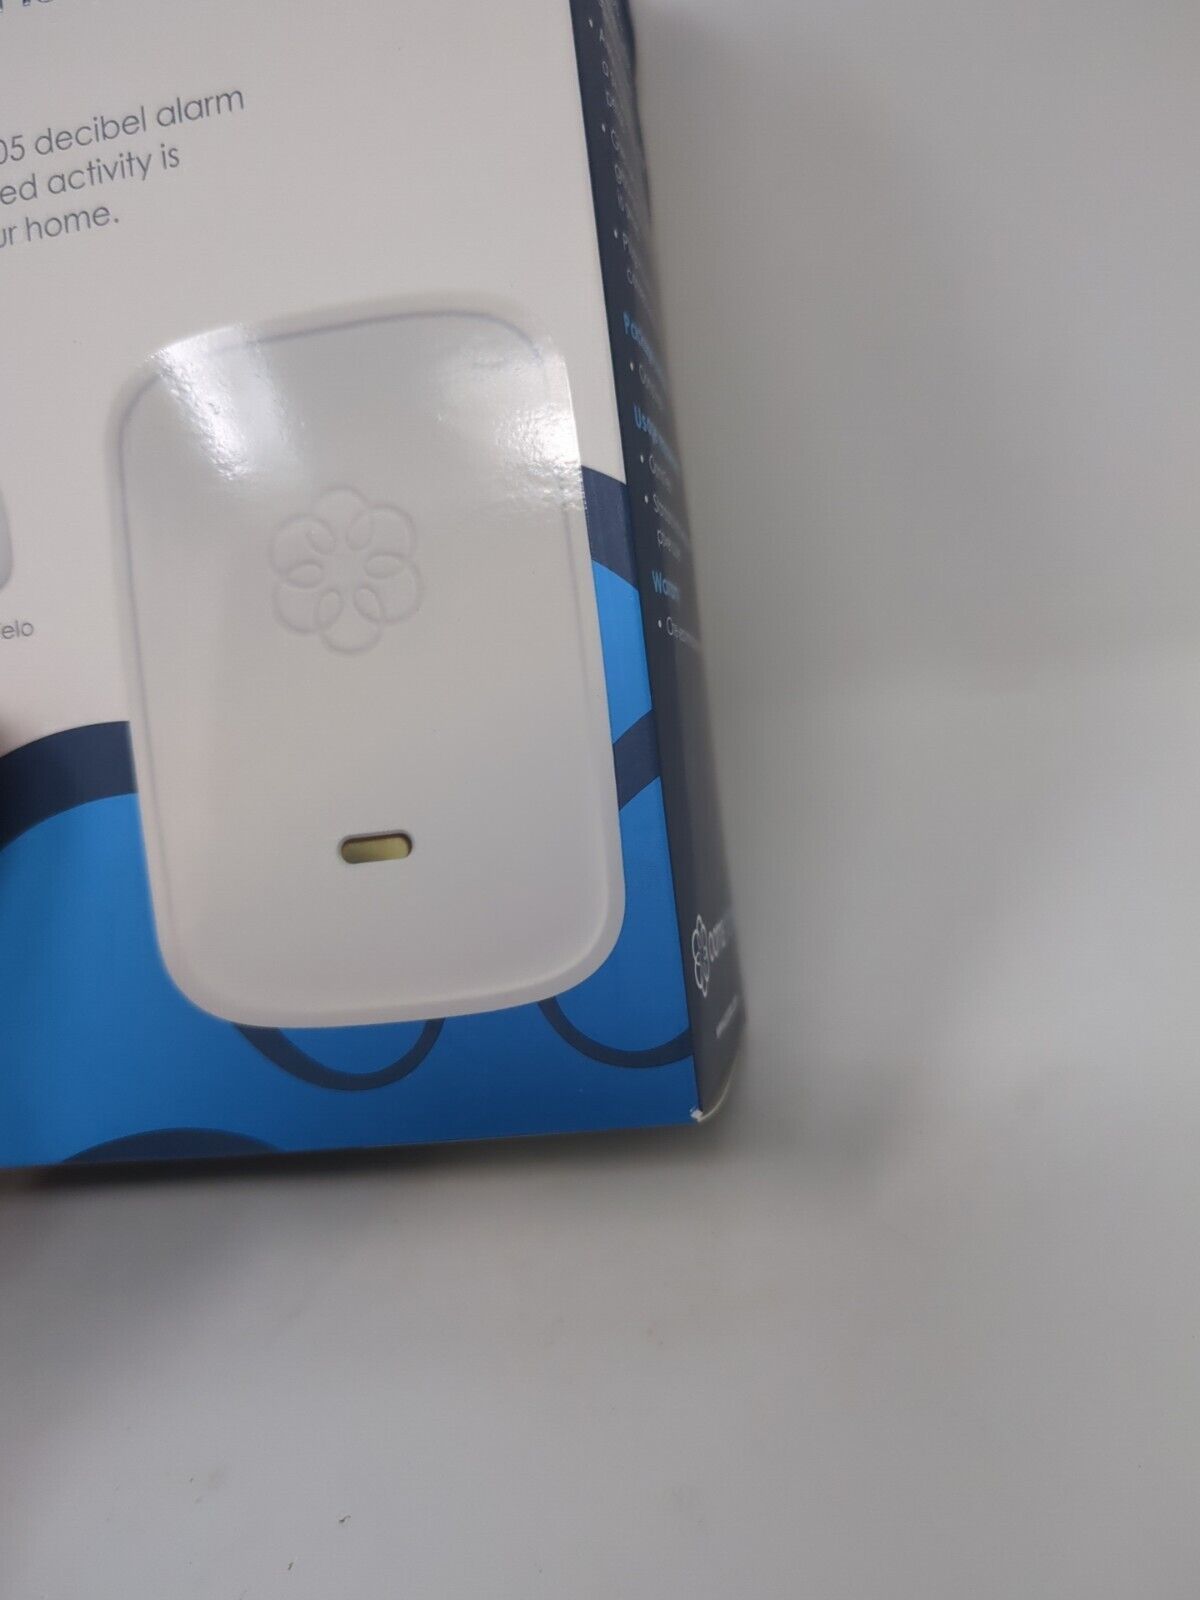 Ooma Security Siren for Ooma Telo or Security System - New, factory sealed